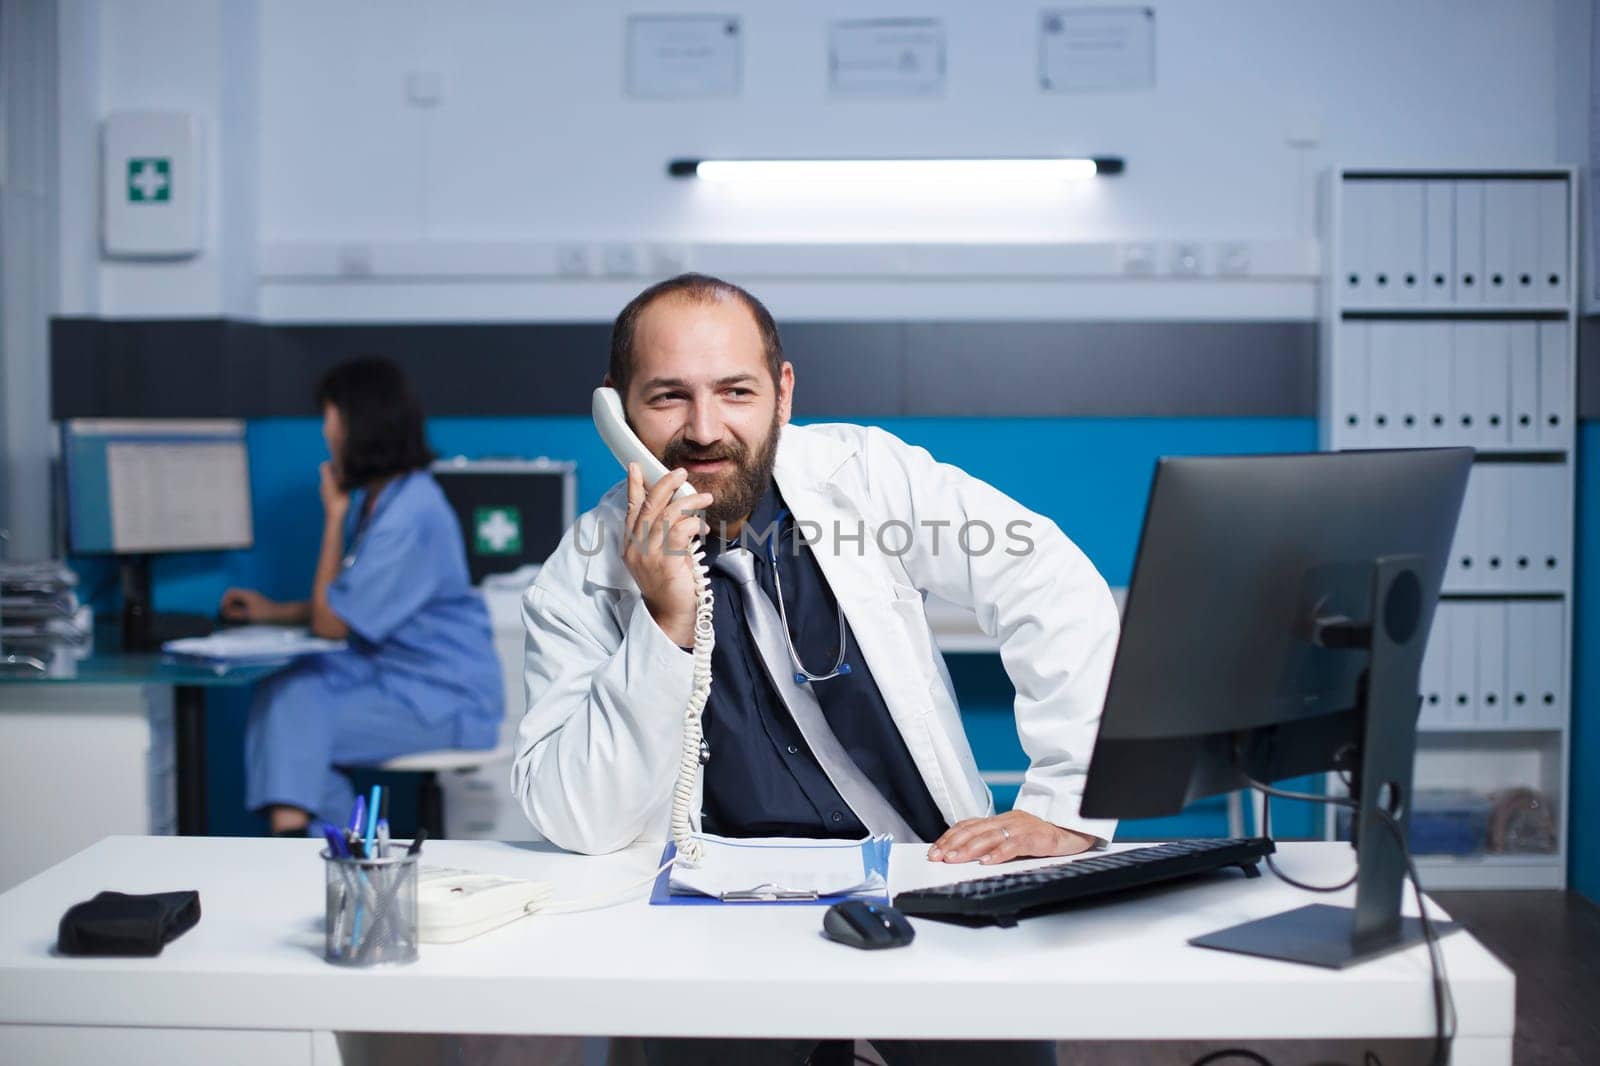 Caucasian male doctor seated at the office desk talking on the telephone with other healthcare specialists. Man wearing a lab coat is using a landline phone to speak with a hospital receptionist.